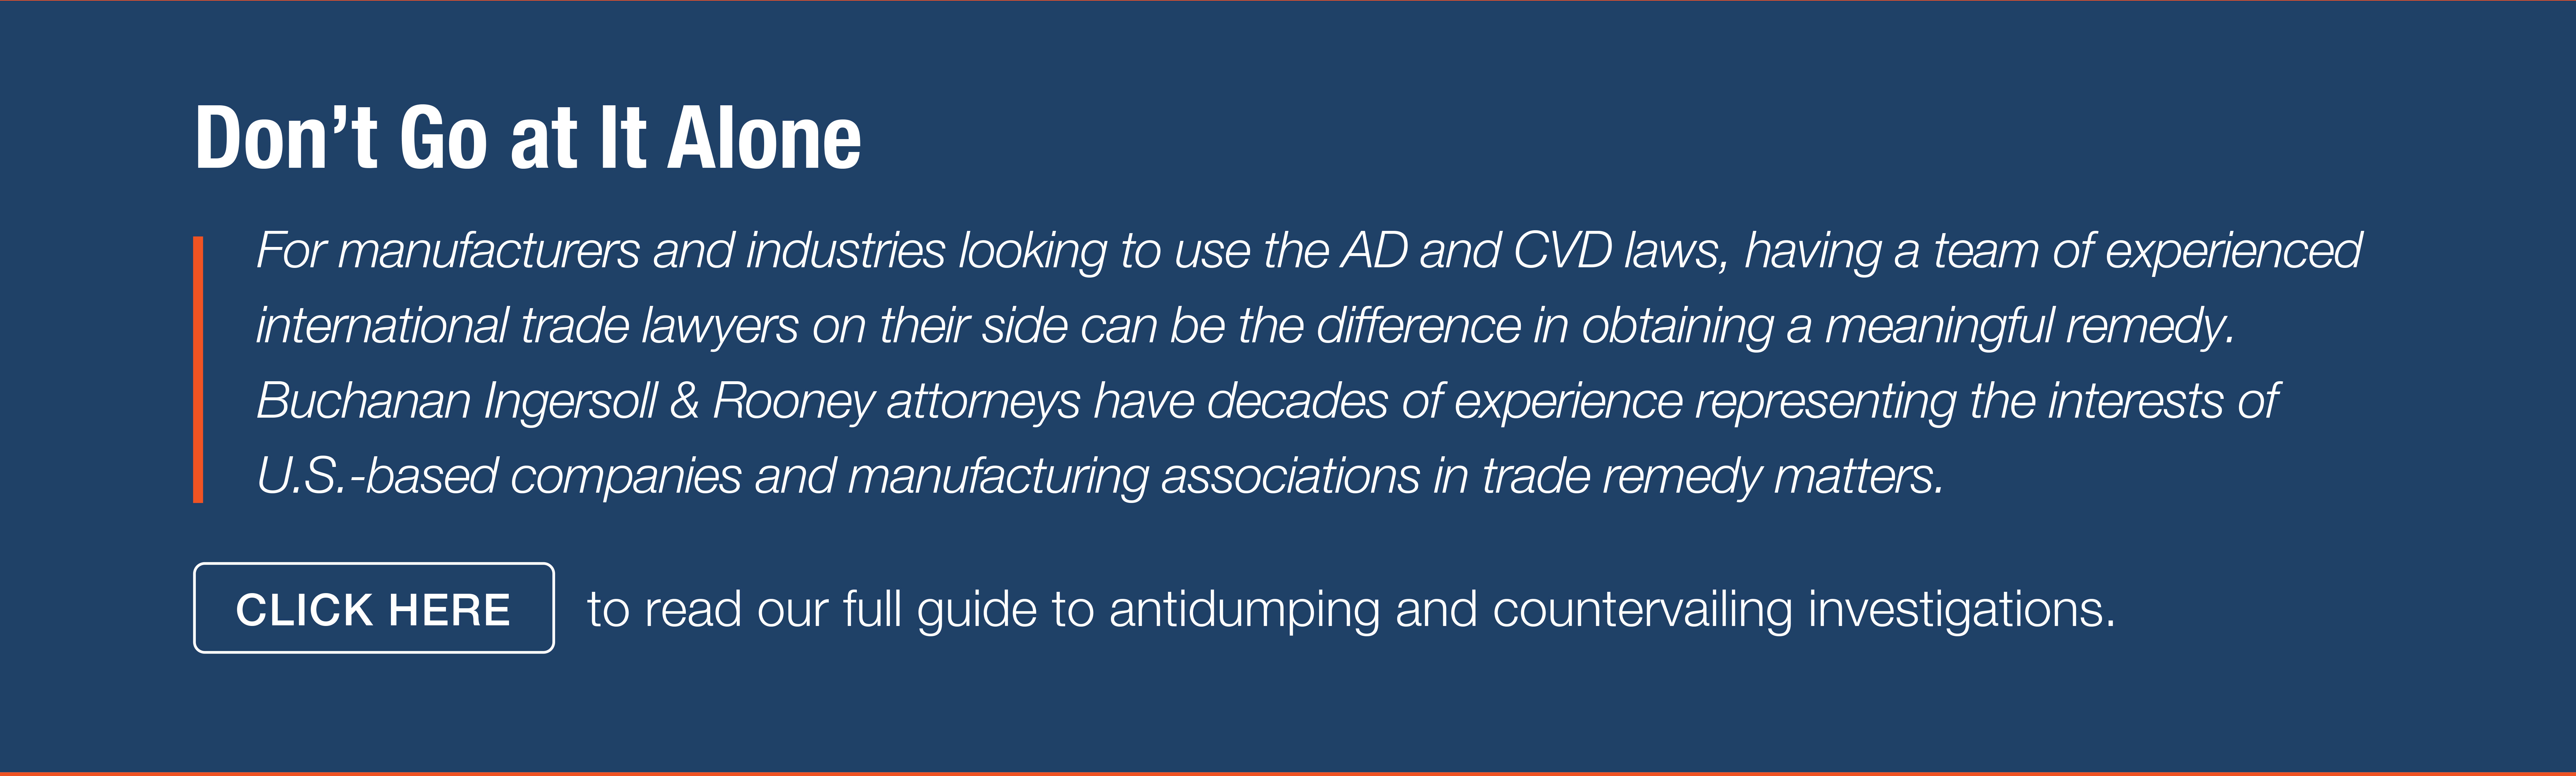 Don’t Go at It Alone

For manufacturers and industries looking to use the AD and CVD laws, having a team of experienced international trade lawyers on their side can be the difference in obtaining a meaningful remedy.

Buchanan Ingersoll & Rooney attorneys have decades of experience representing the interests of U.S.-based companies and manufacturing associations in trade remedy matters.

CLICK HERE to read our full guide to antidumping and countervailing investigations.